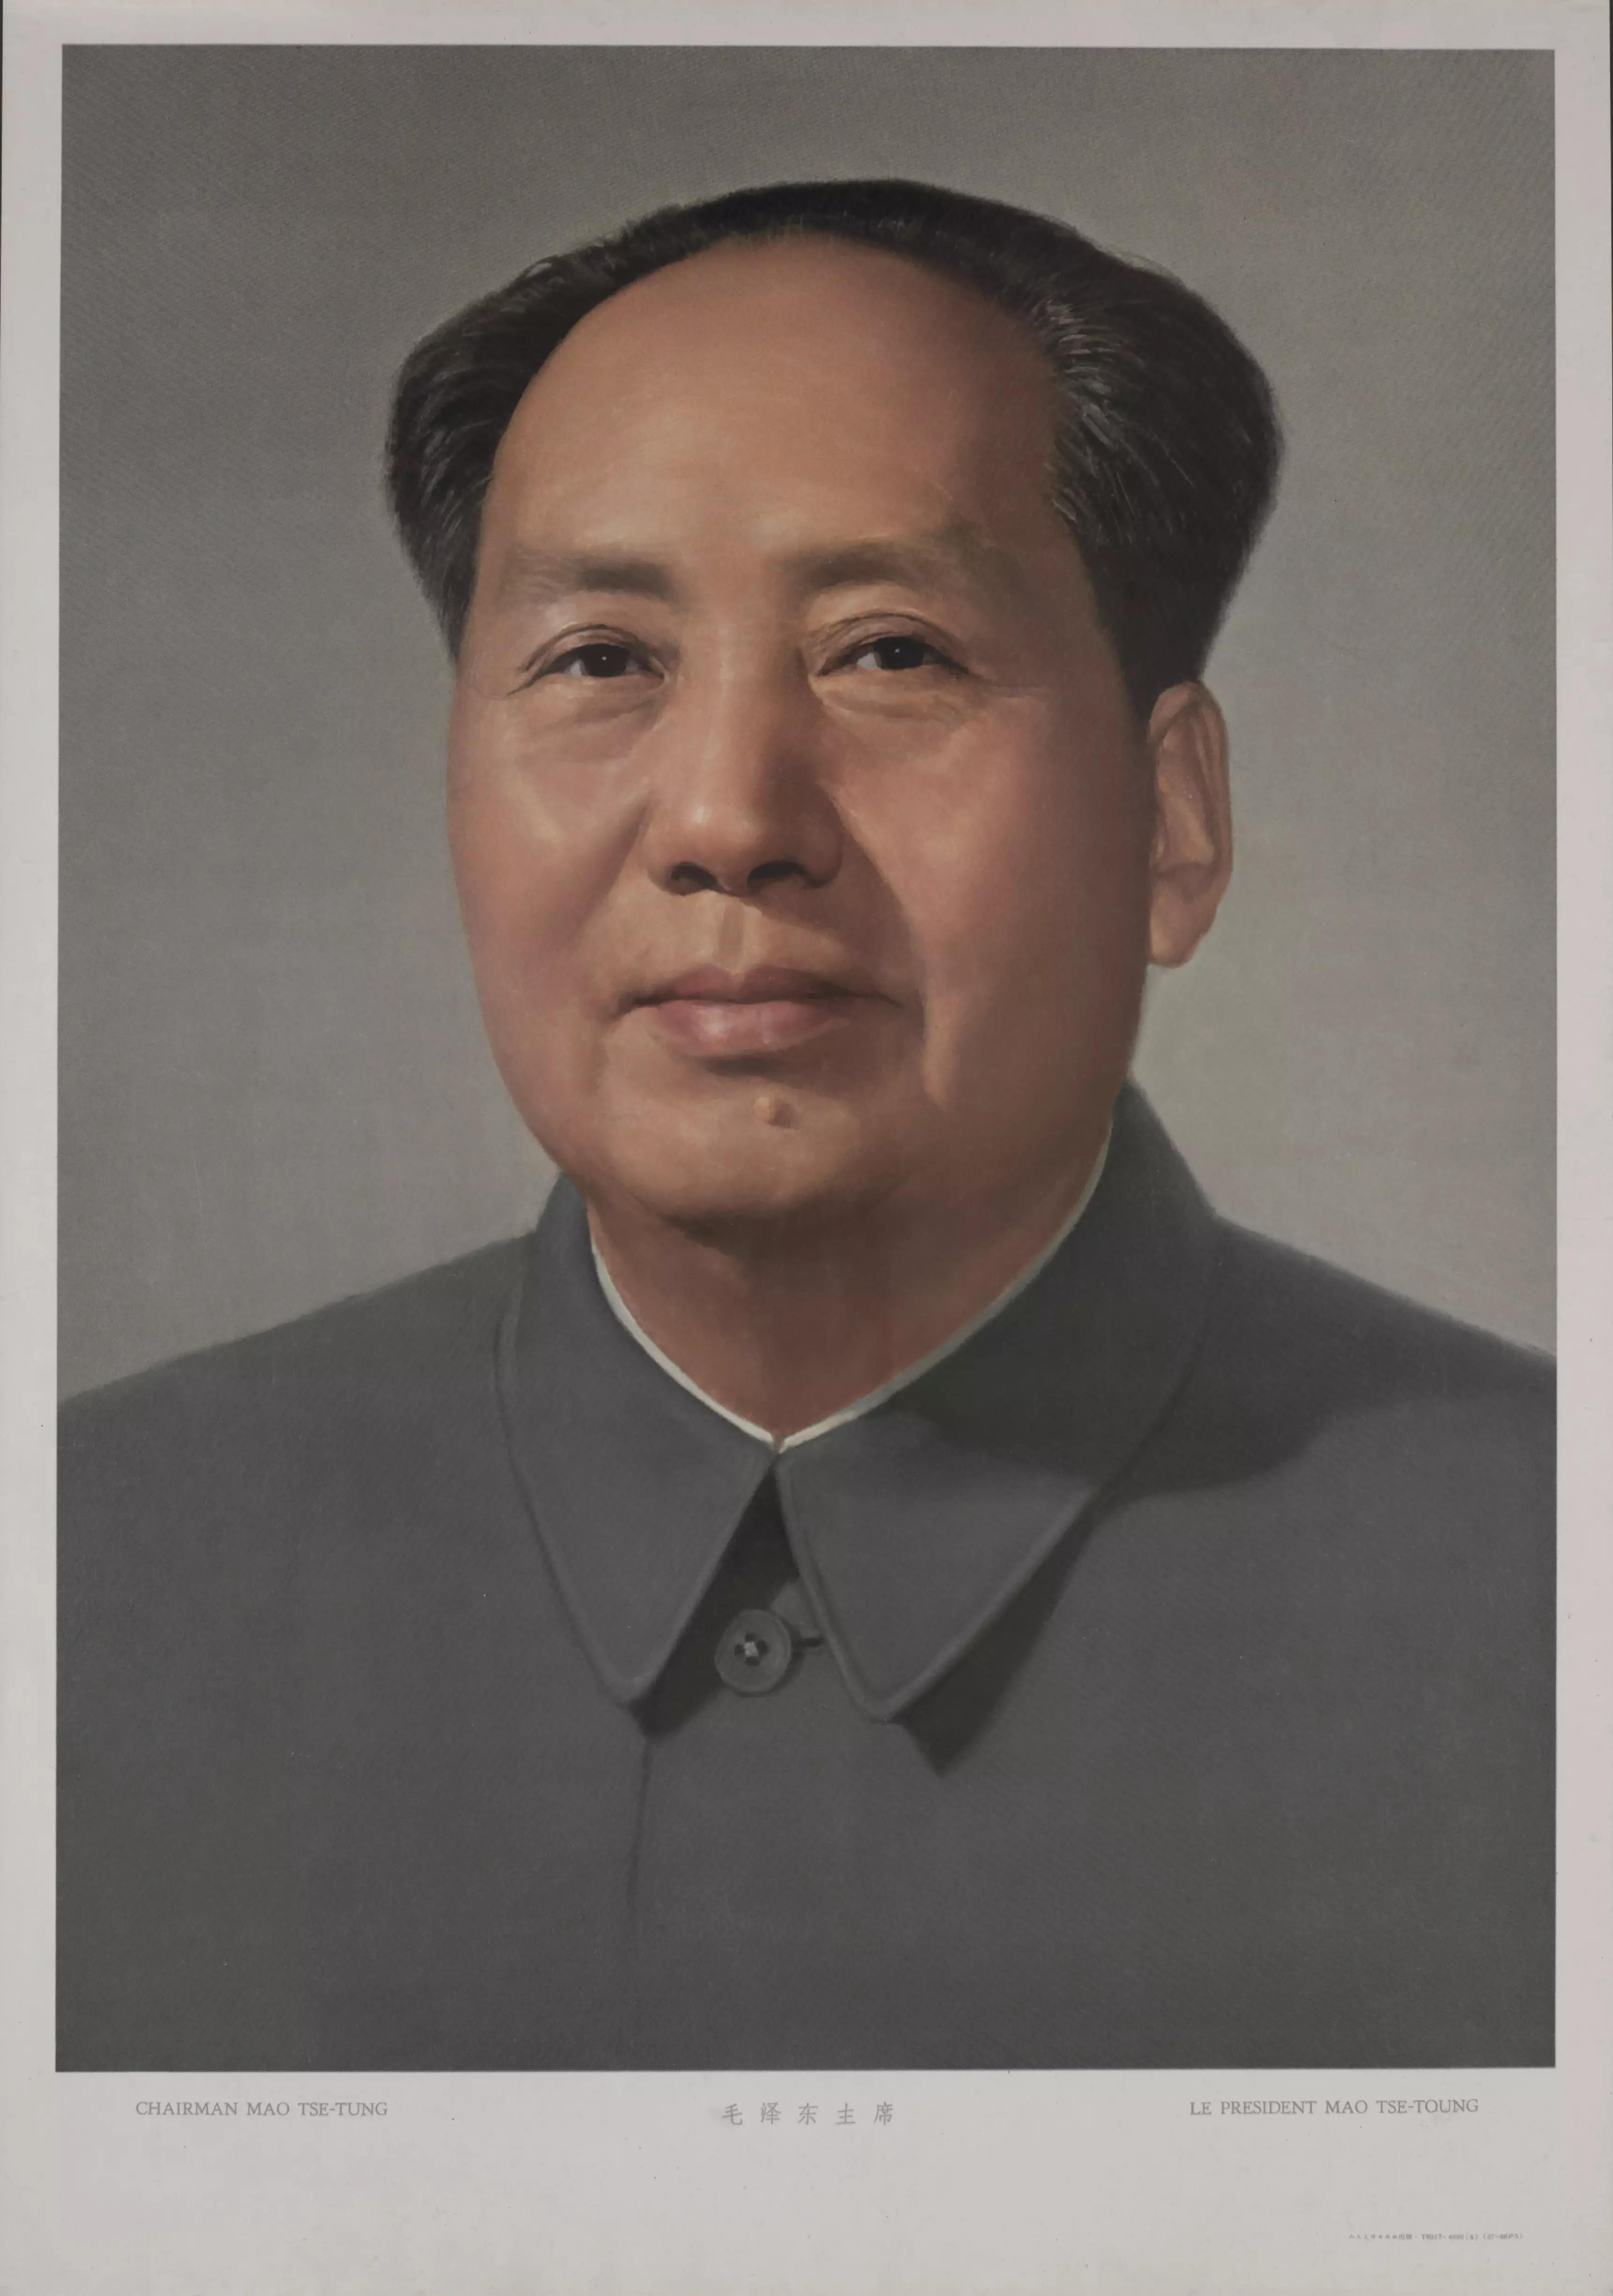 A picture of the late Mao Zedong hung in Beijing's Tiananmen square prior to the 2008 Olympic Games.